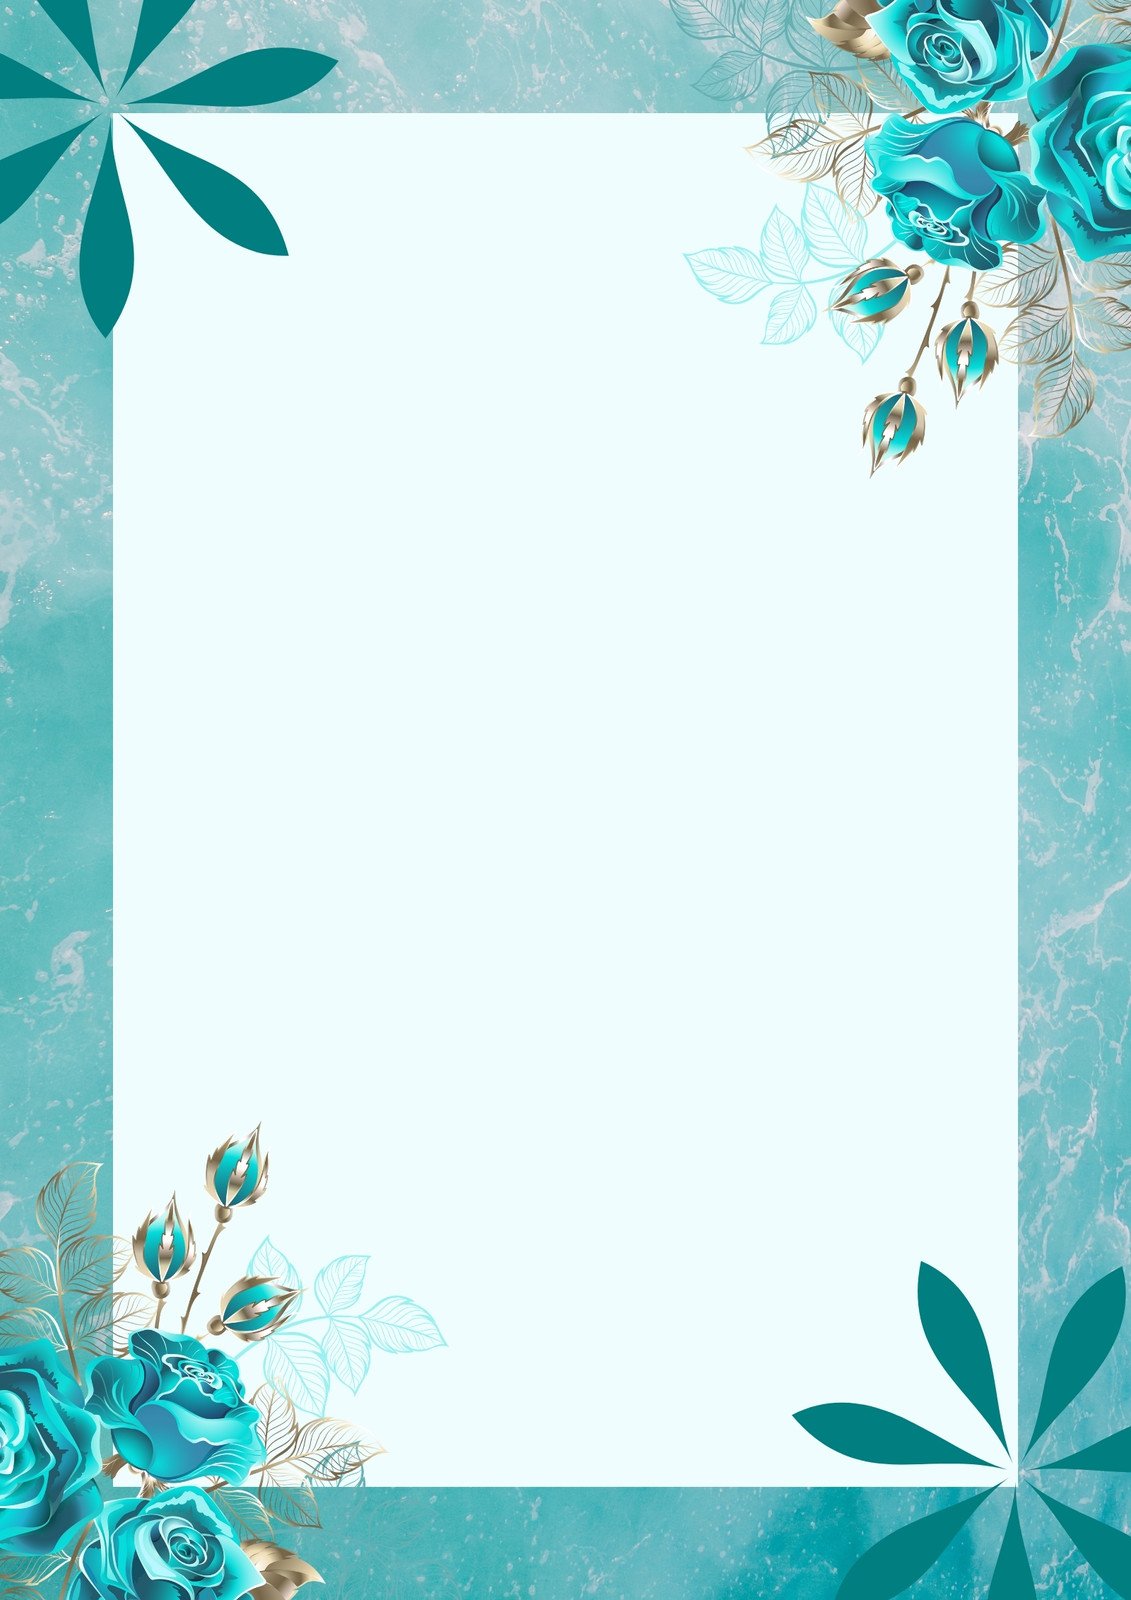 Customize 46+ Beautiful Page Border Templates Online - Canva